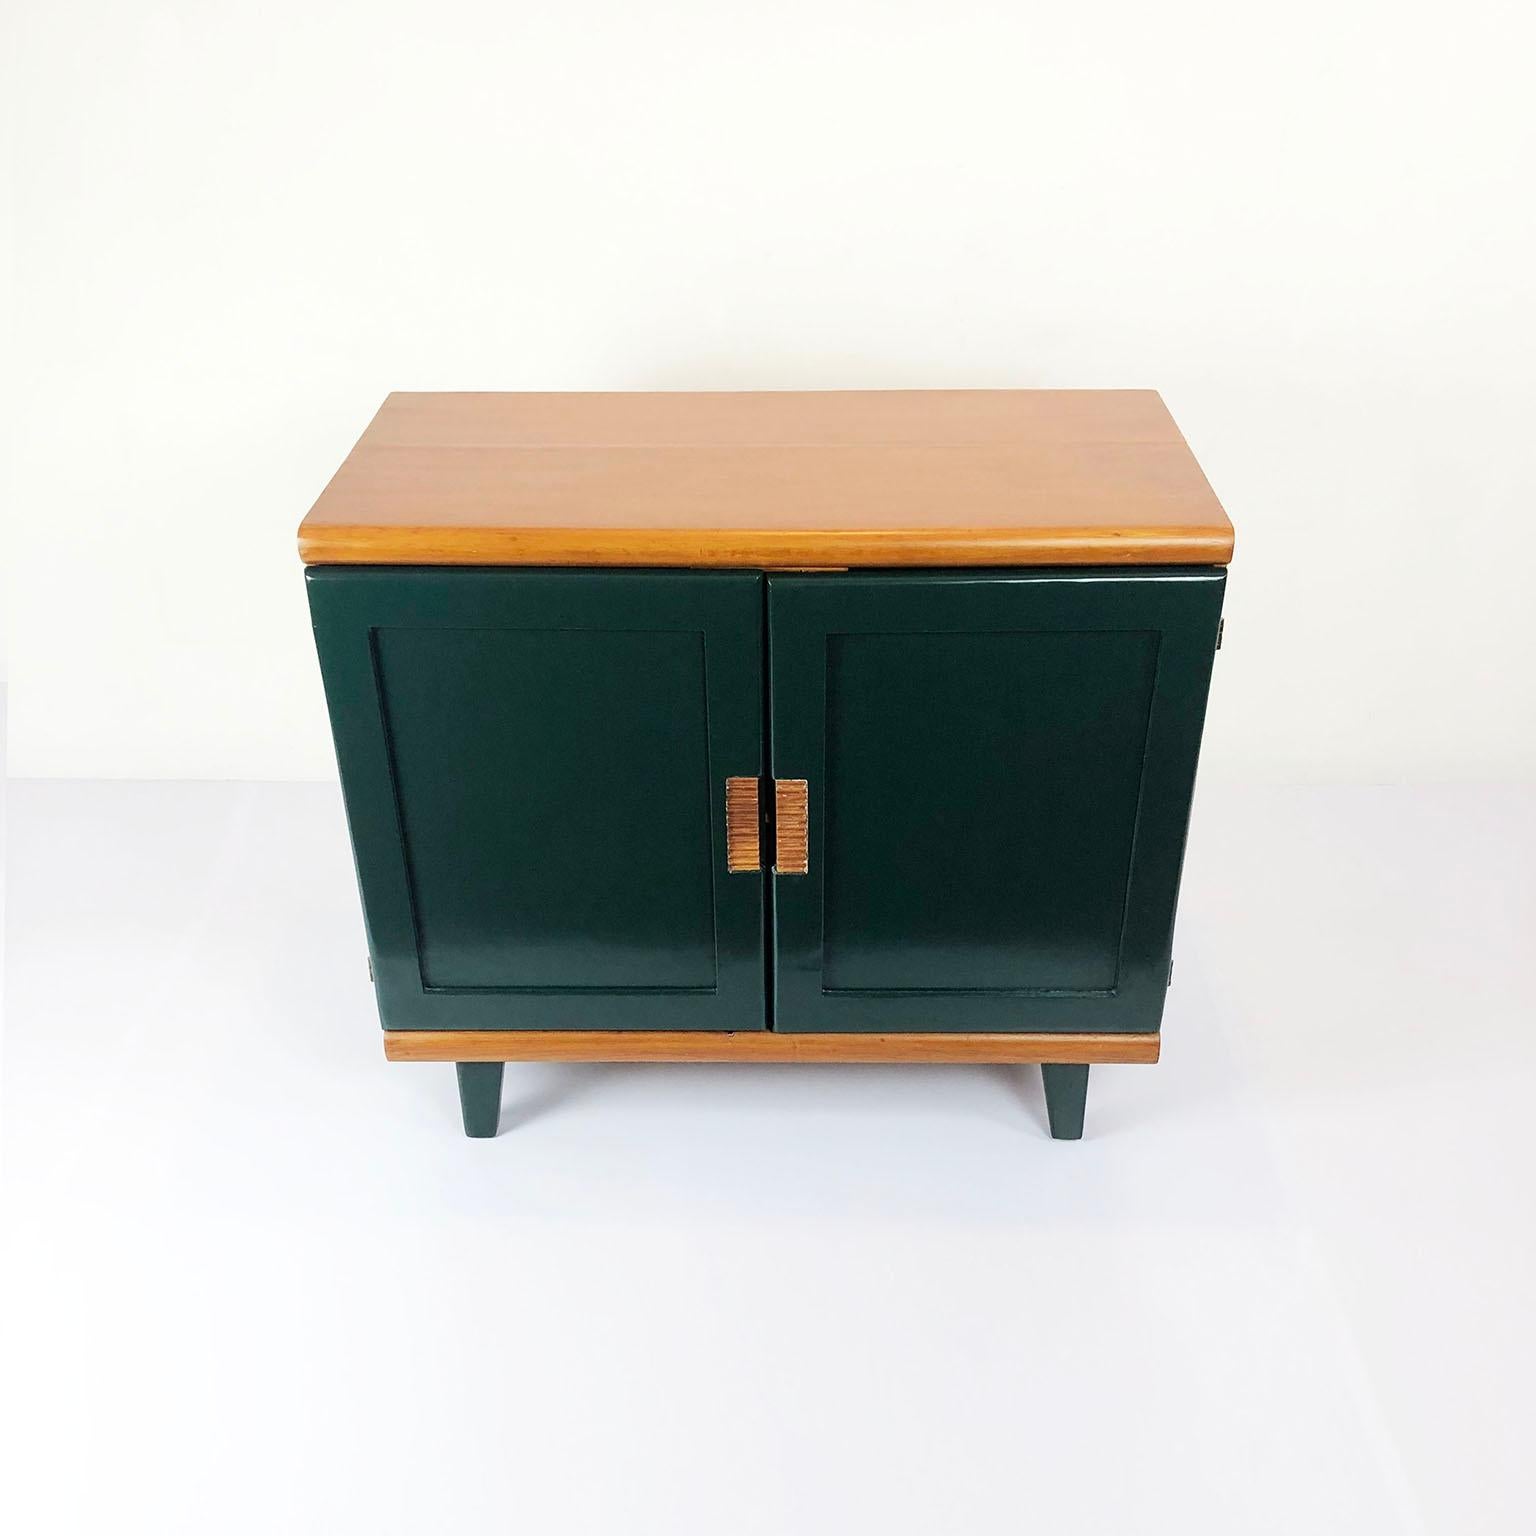 Designed by the American Bauhaus designer, Michael van Beuren in Mexico, this handmade, solid pine wood credenza was recently restored circa 1940.

About Michael van Beuren: Michael van Beuren (1911–2004) was born in New York and studied